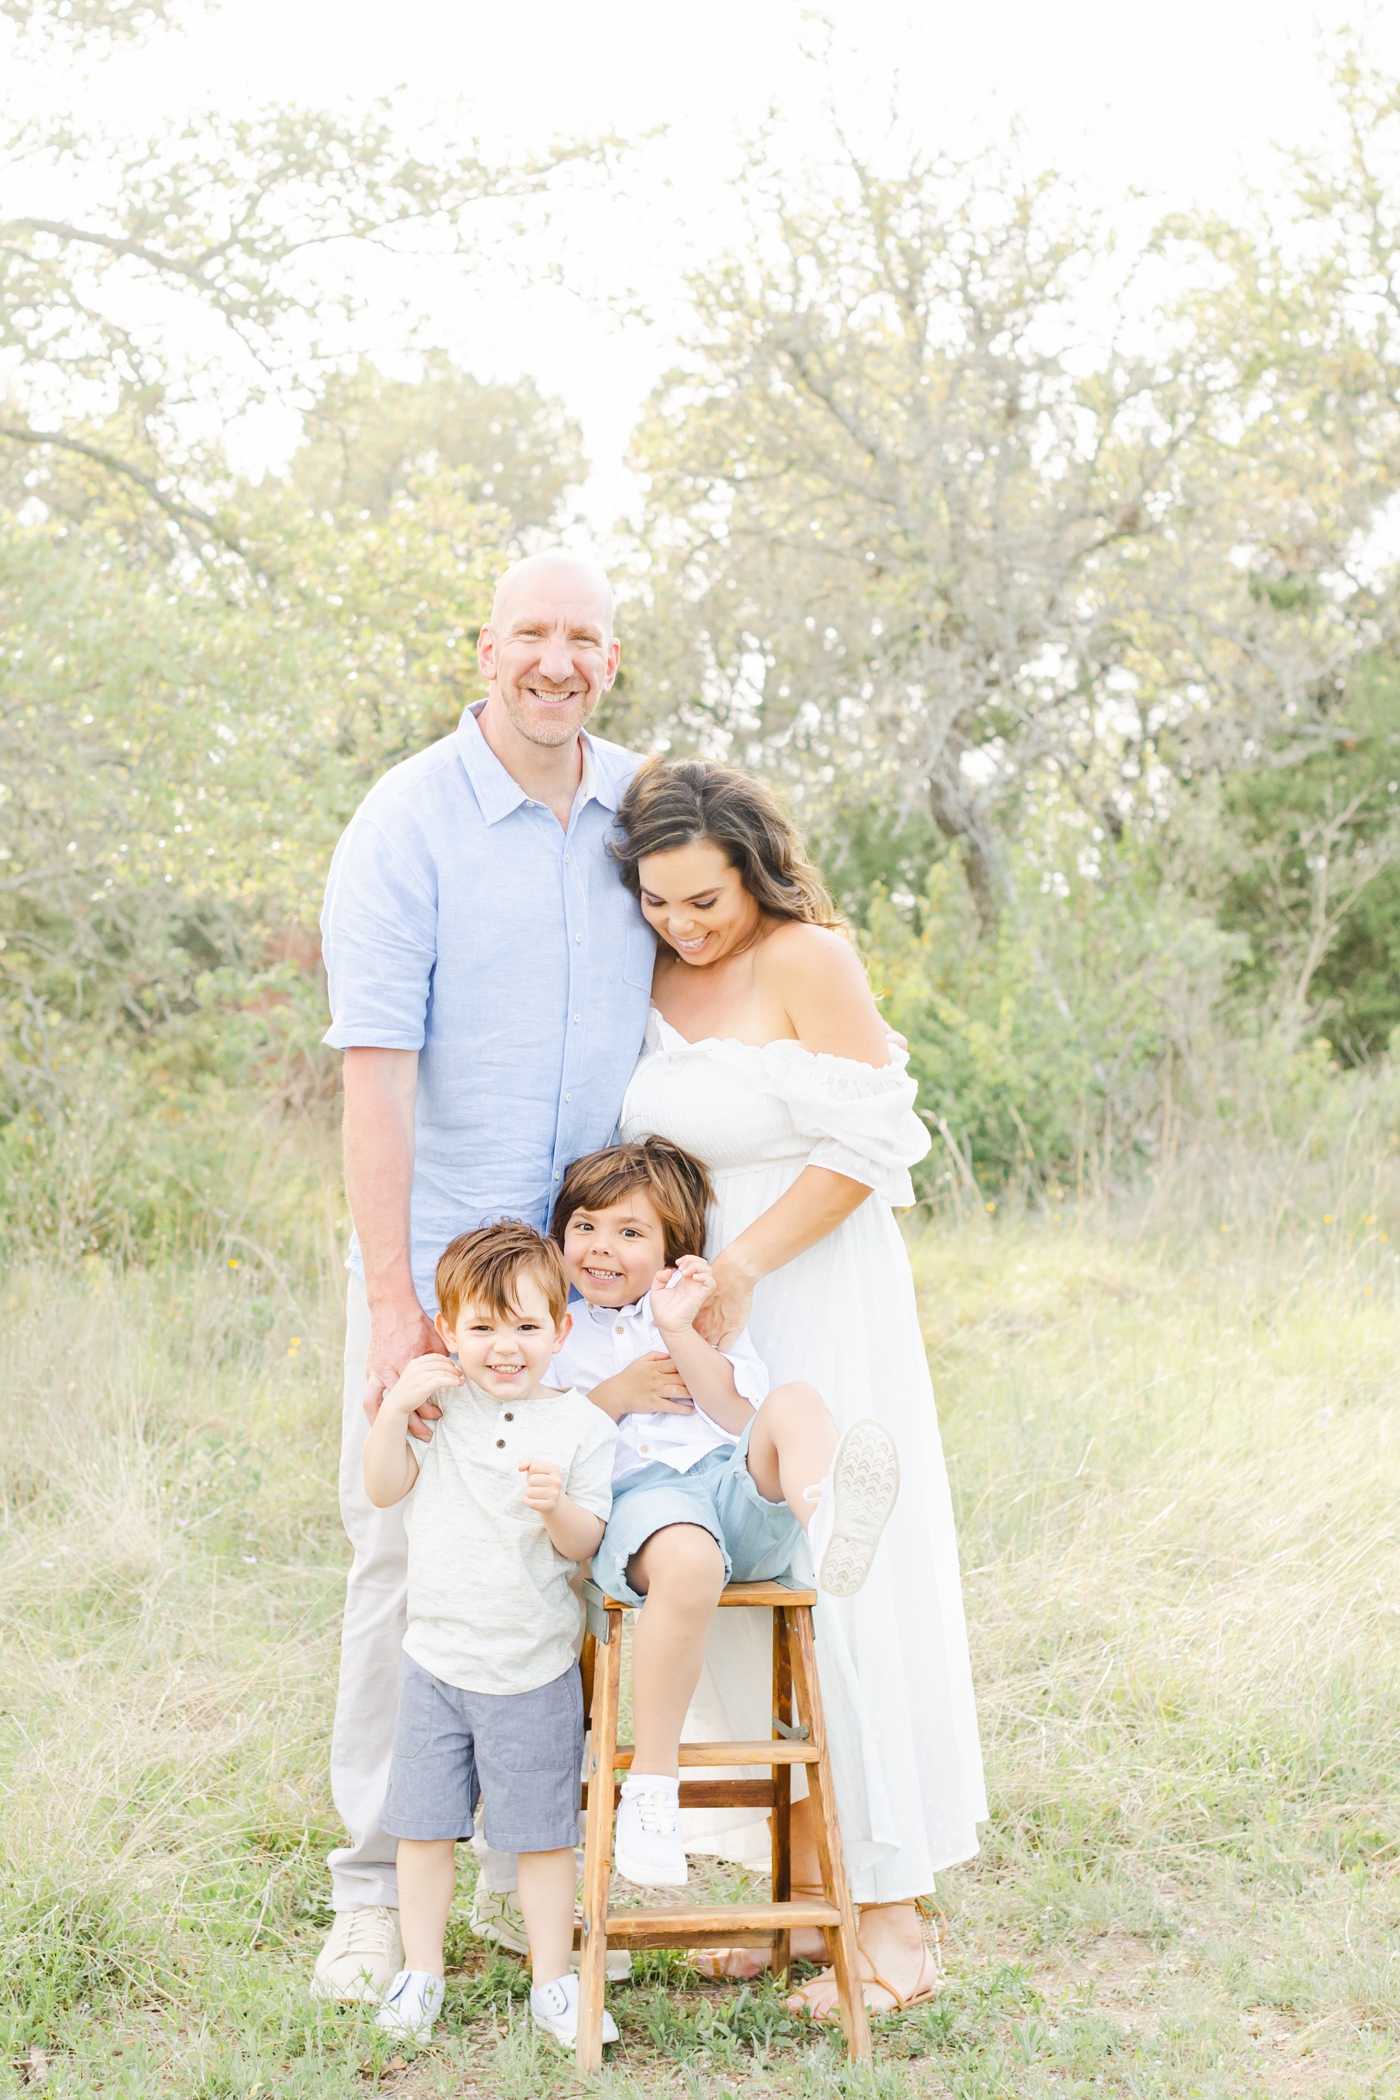 Family photoshoot in Cedar Park with Mom tickling big brother. Photo by Sana Ahmed Photography.